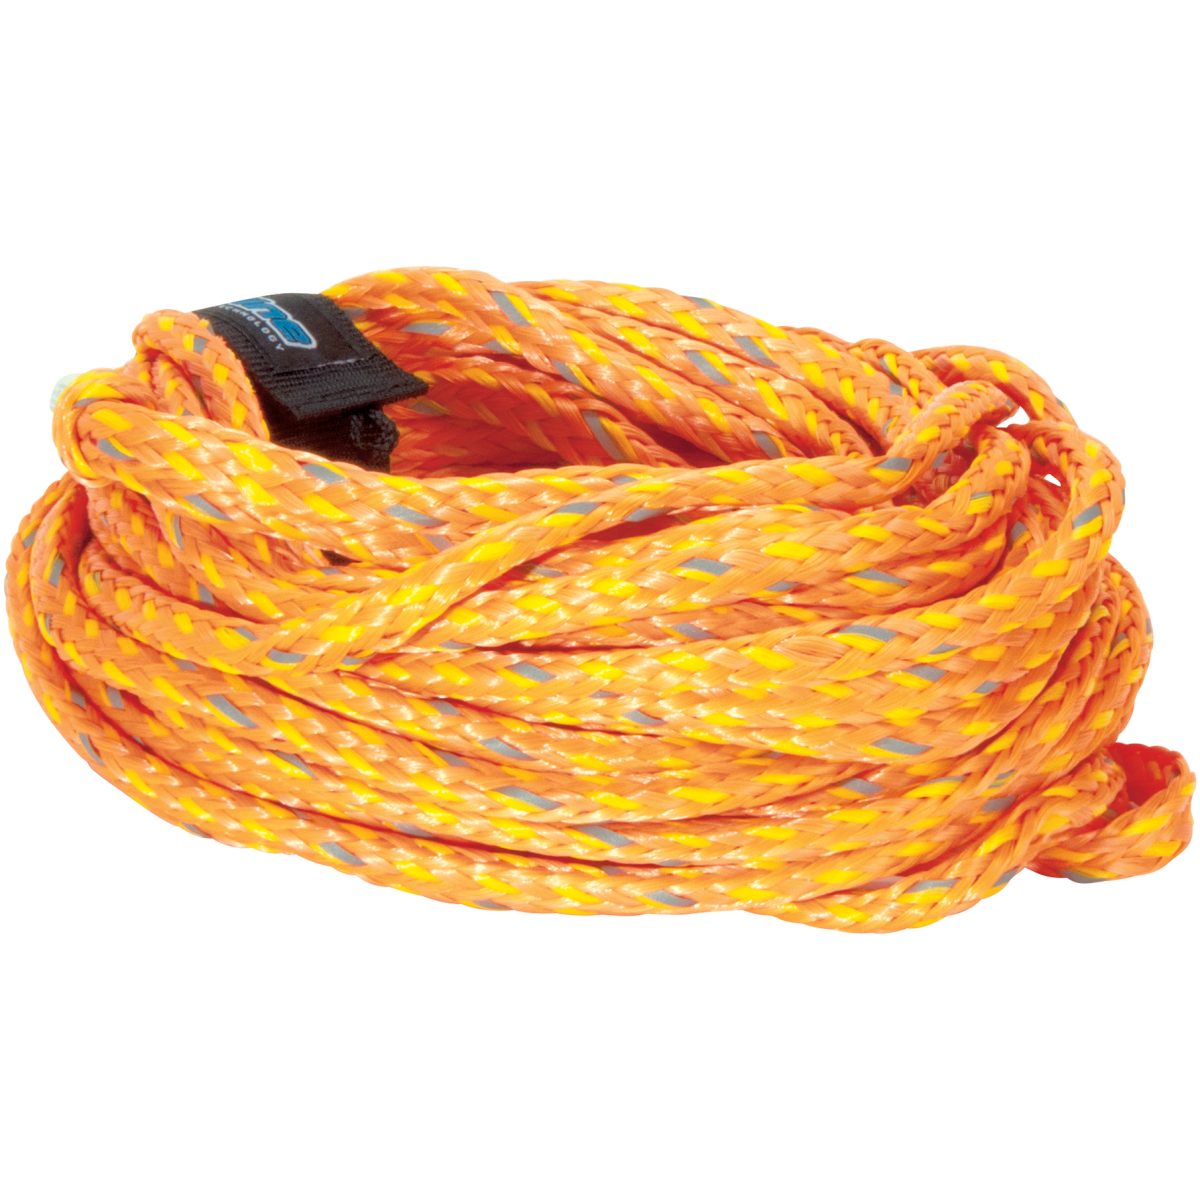 Connelly Proline 2-Person Safety Tube Rope - Orange